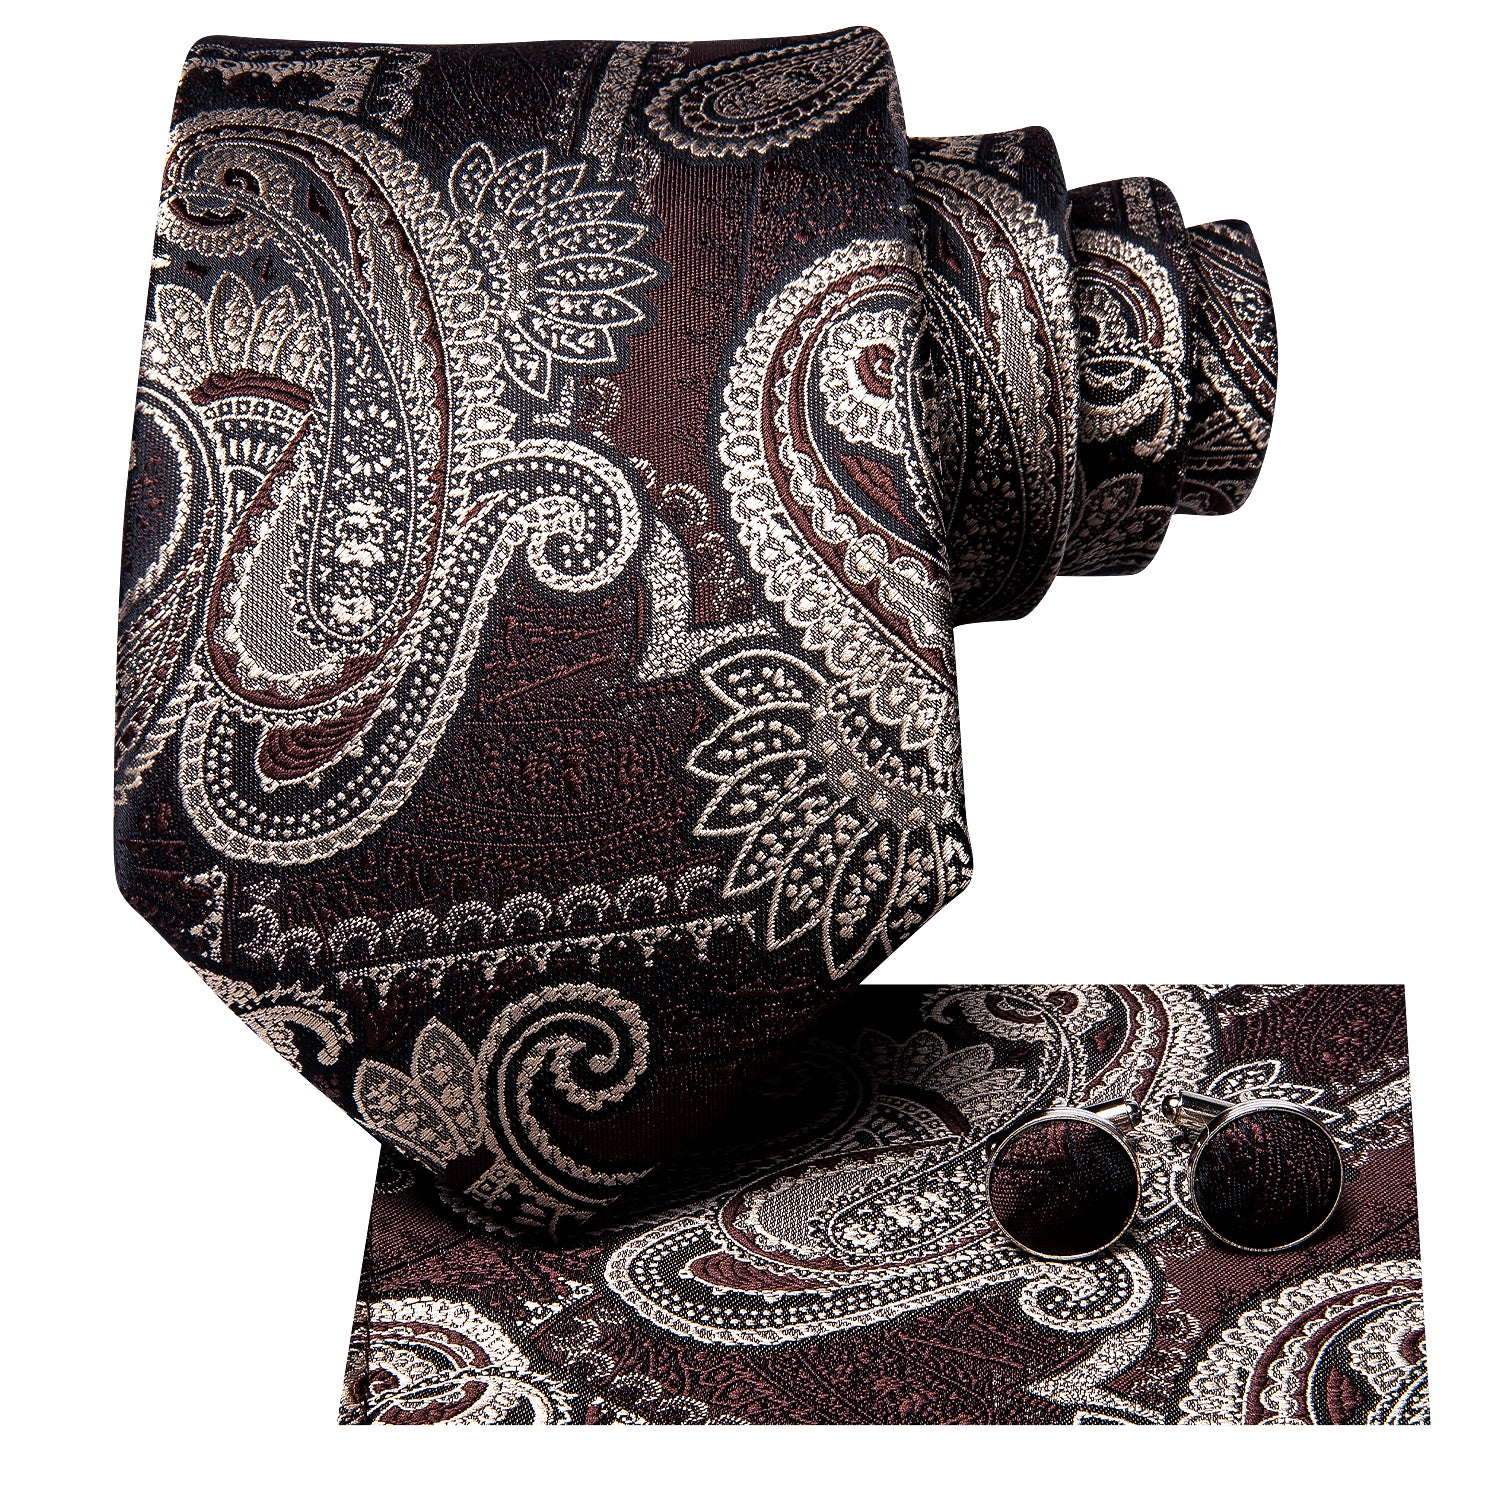 Red-brown Silver Paisley Tie Pocket Square Cufflinks Set